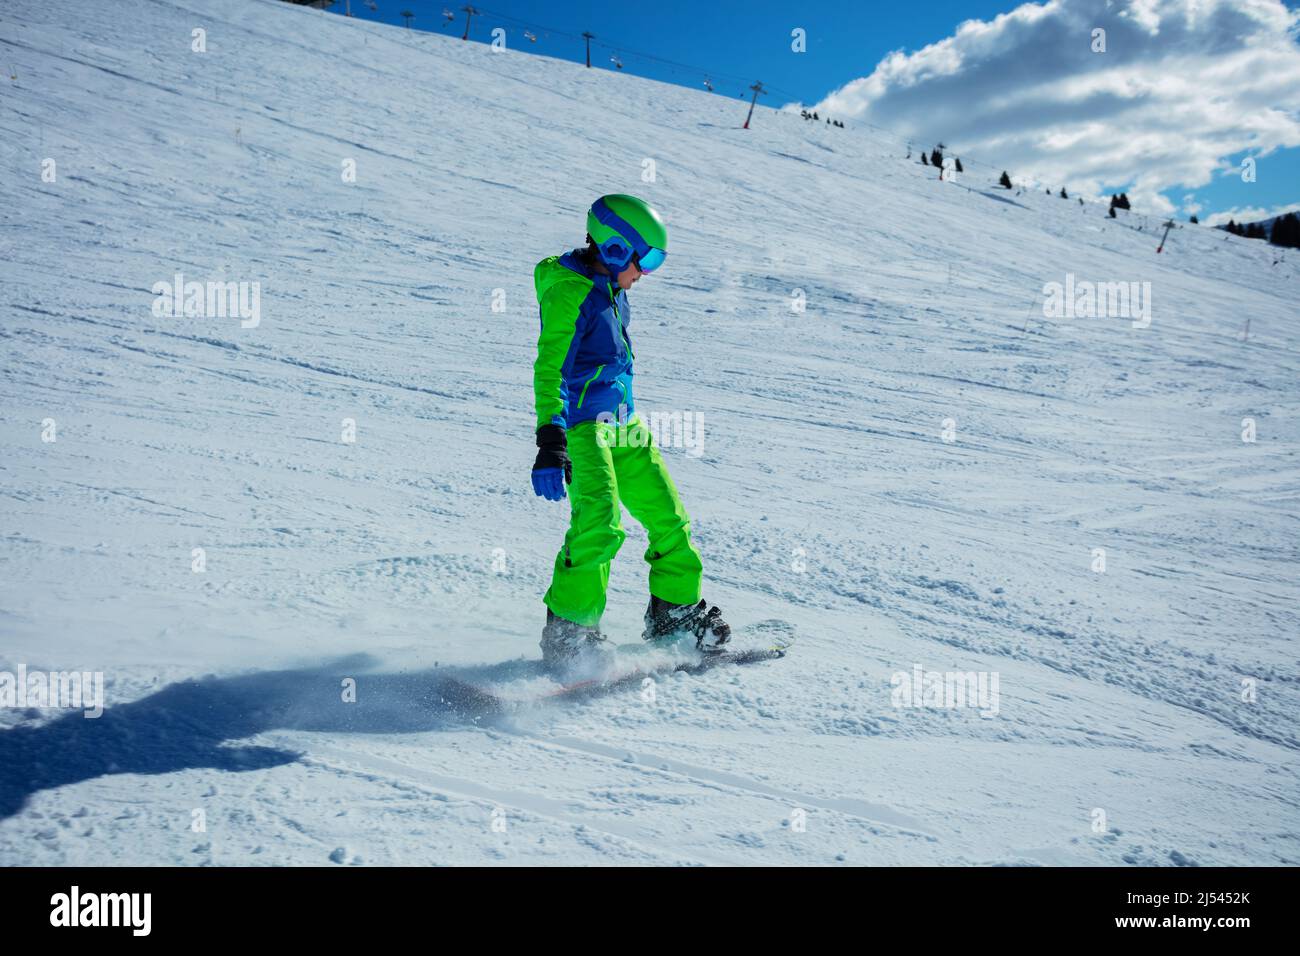 Boy on snowboard in full snowboarder outfit go fast downhill Stock Photo